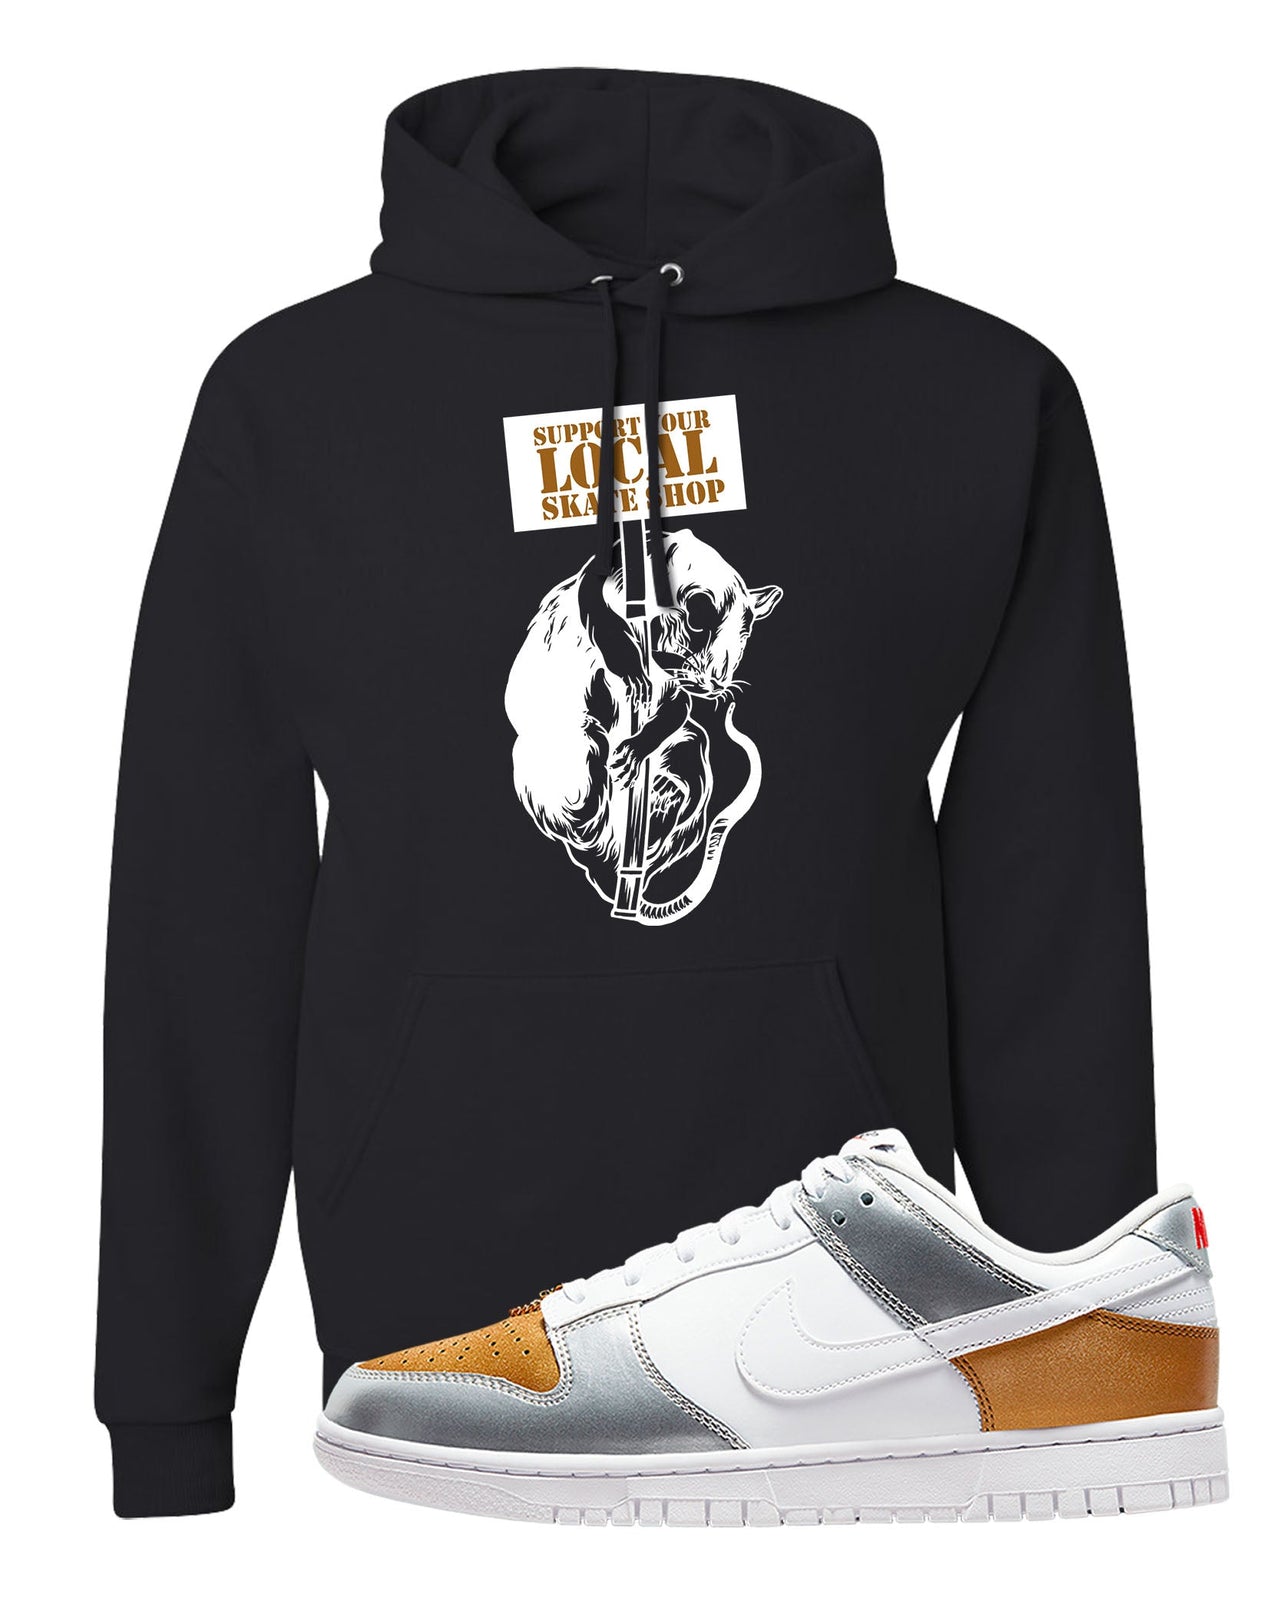 Gold Silver Red Low Dunks Hoodie | Support Your Local Skate Shop, Black